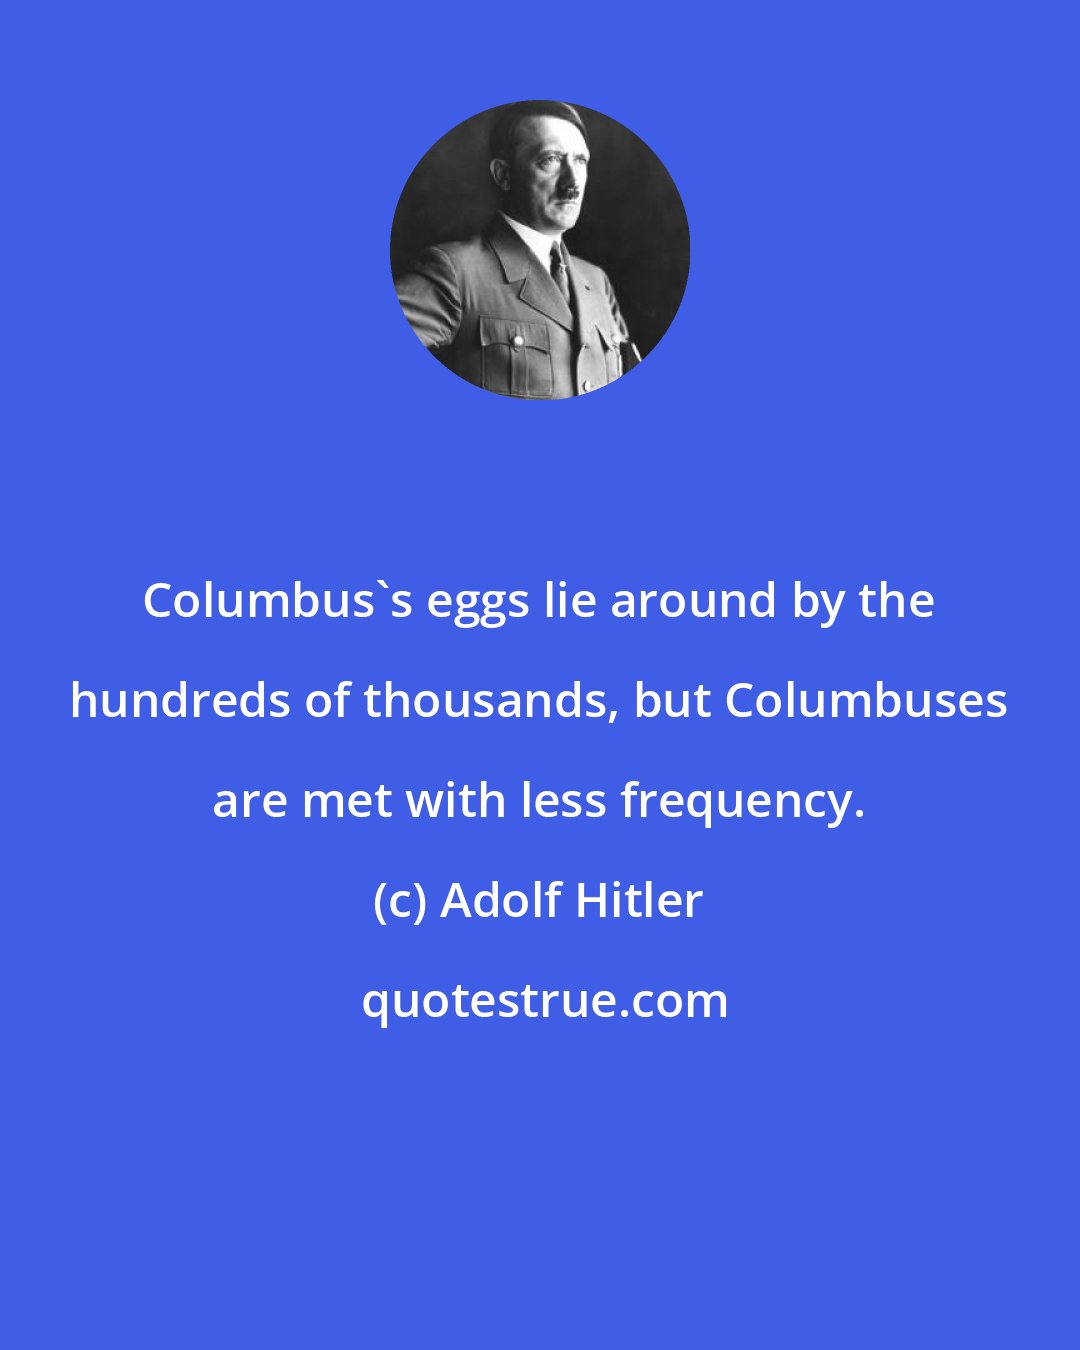 Adolf Hitler: Columbus's eggs lie around by the hundreds of thousands, but Columbuses are met with less frequency.